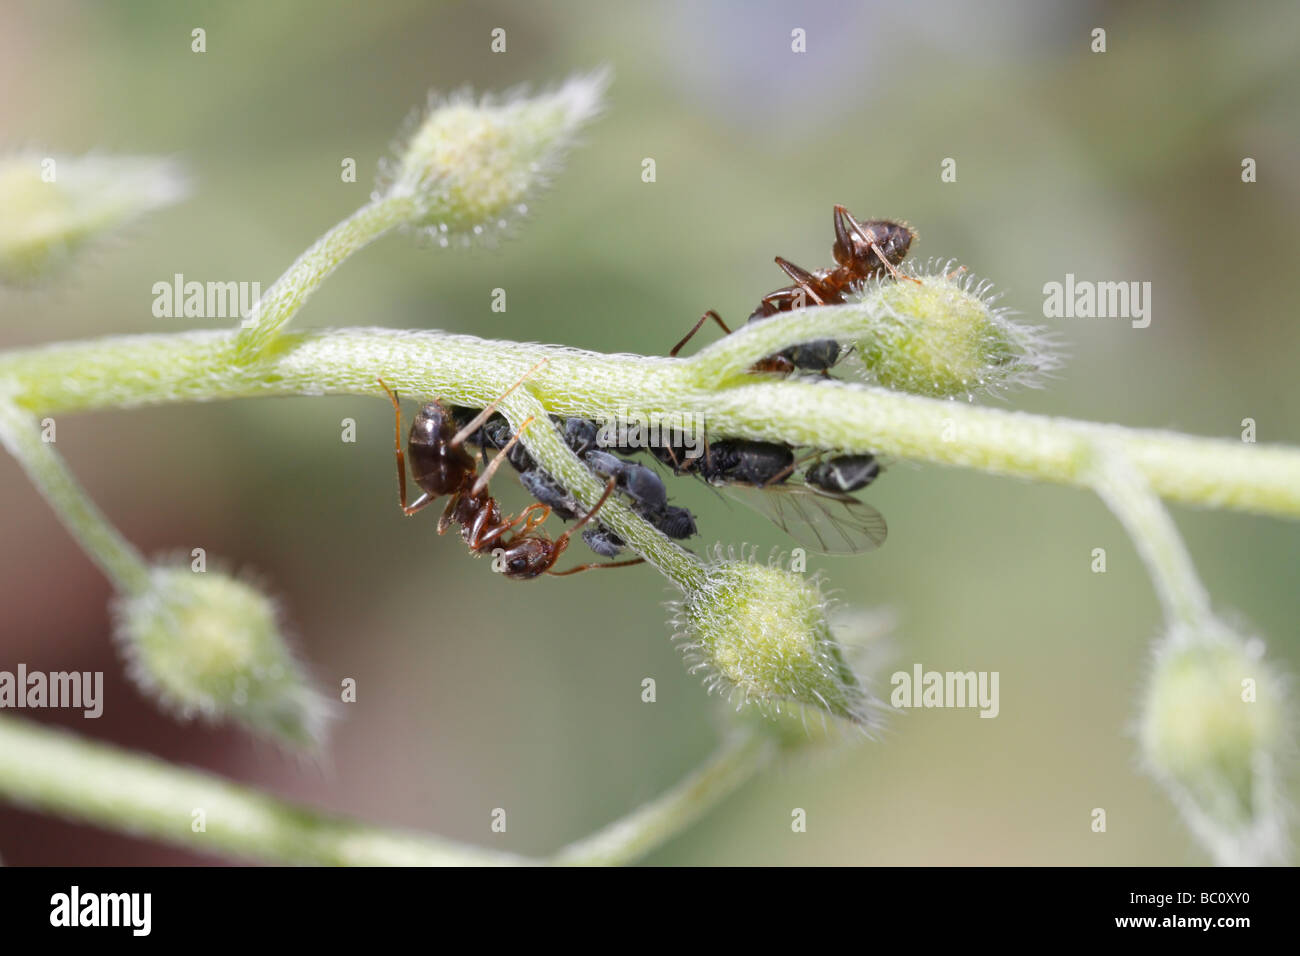 Lasius niger, the black garden ant, and aphids (aphis fa). The ant is milking the aphids. The flower is a forget-me not Stock Photo